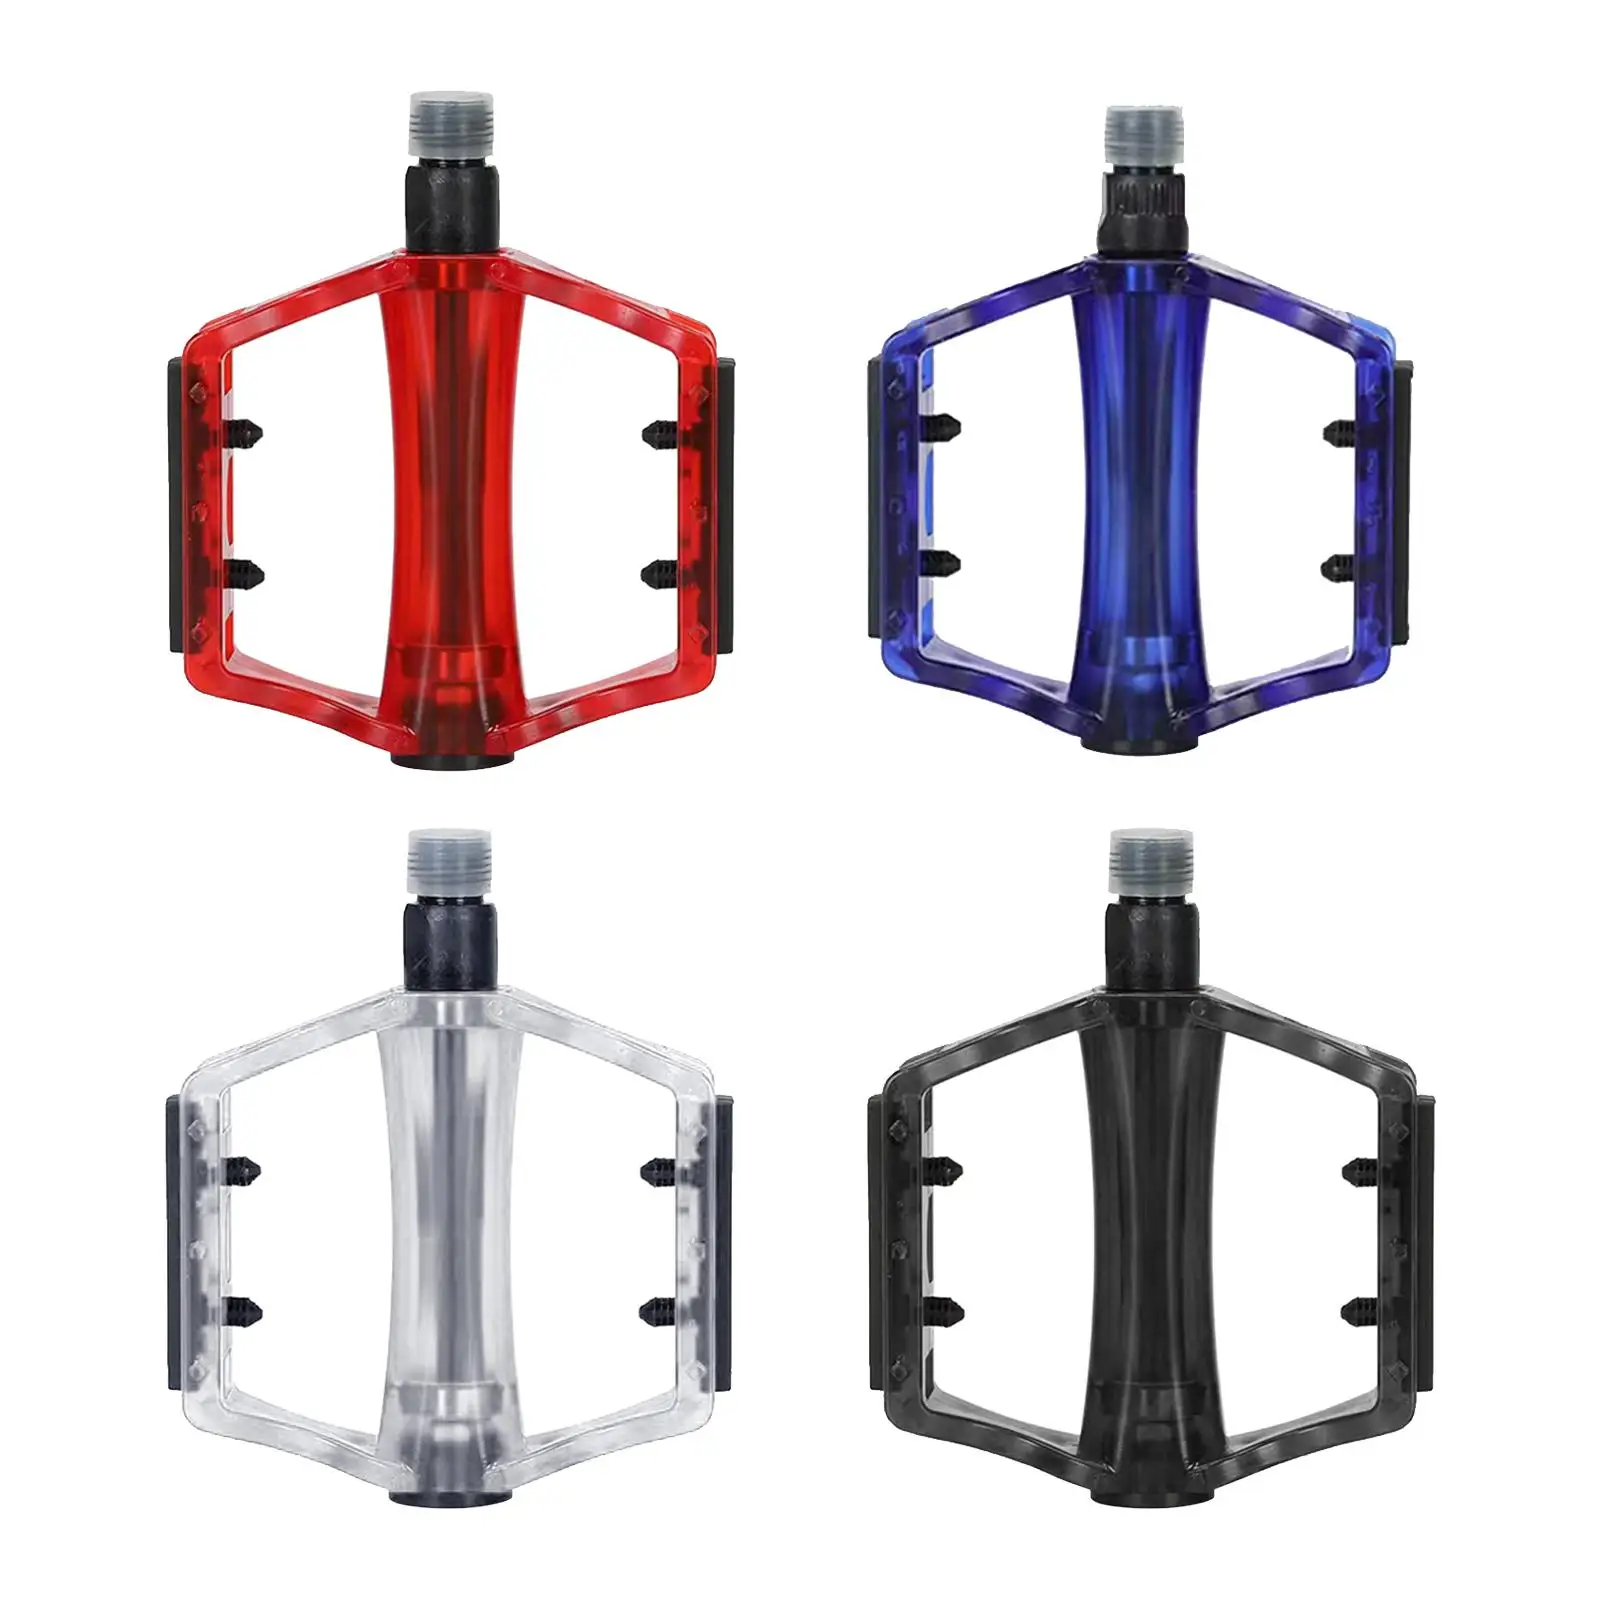 2x Bike Pedals Bicycle Pedals Sealed Bearings Cycling Parts for Mountain Bike Folding Bike Adult Bikes Road Bike Replacement